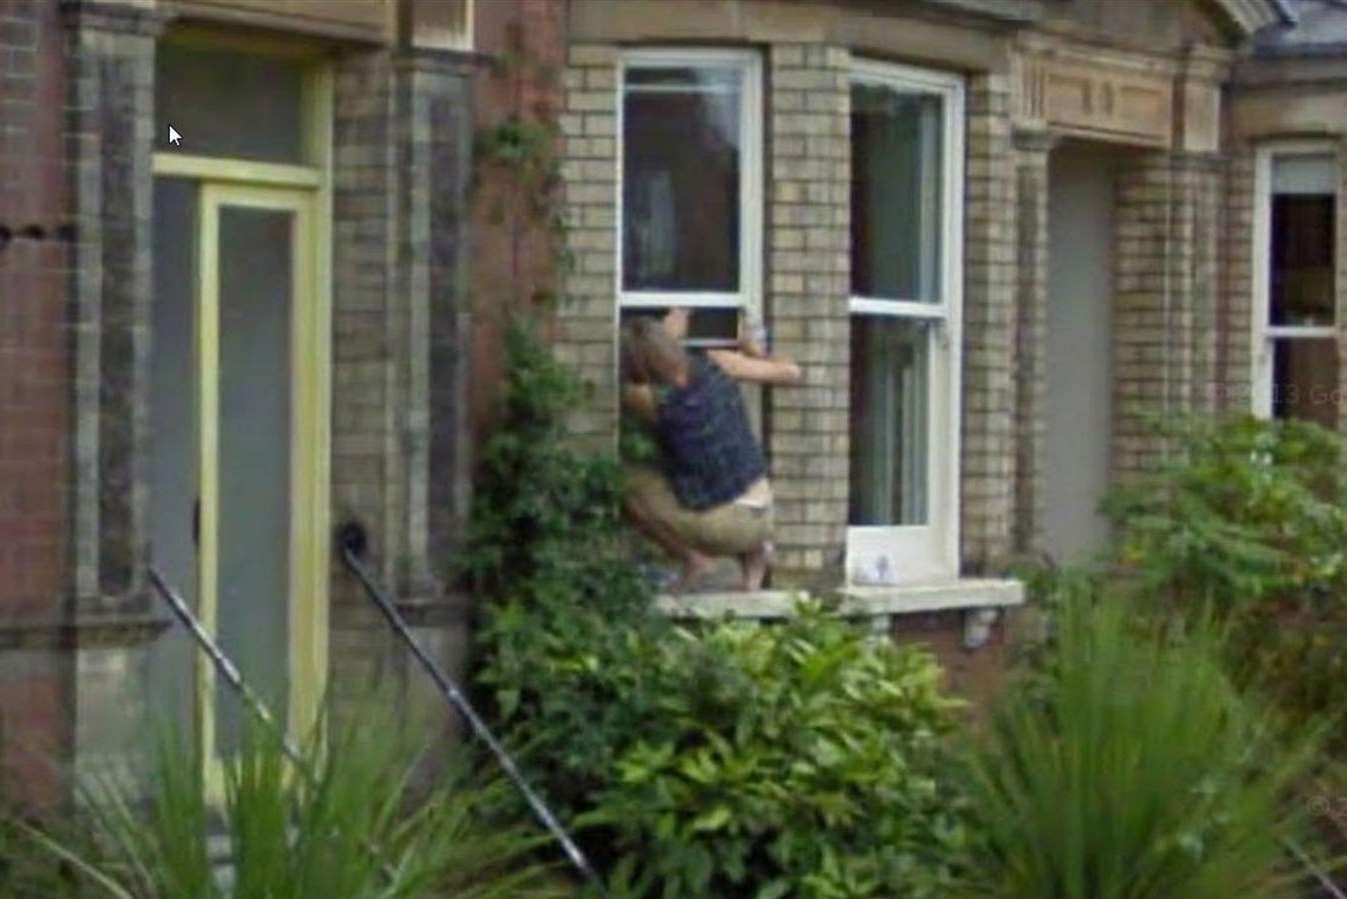 The Google Street View image of a woman climbing through a window in Faversham